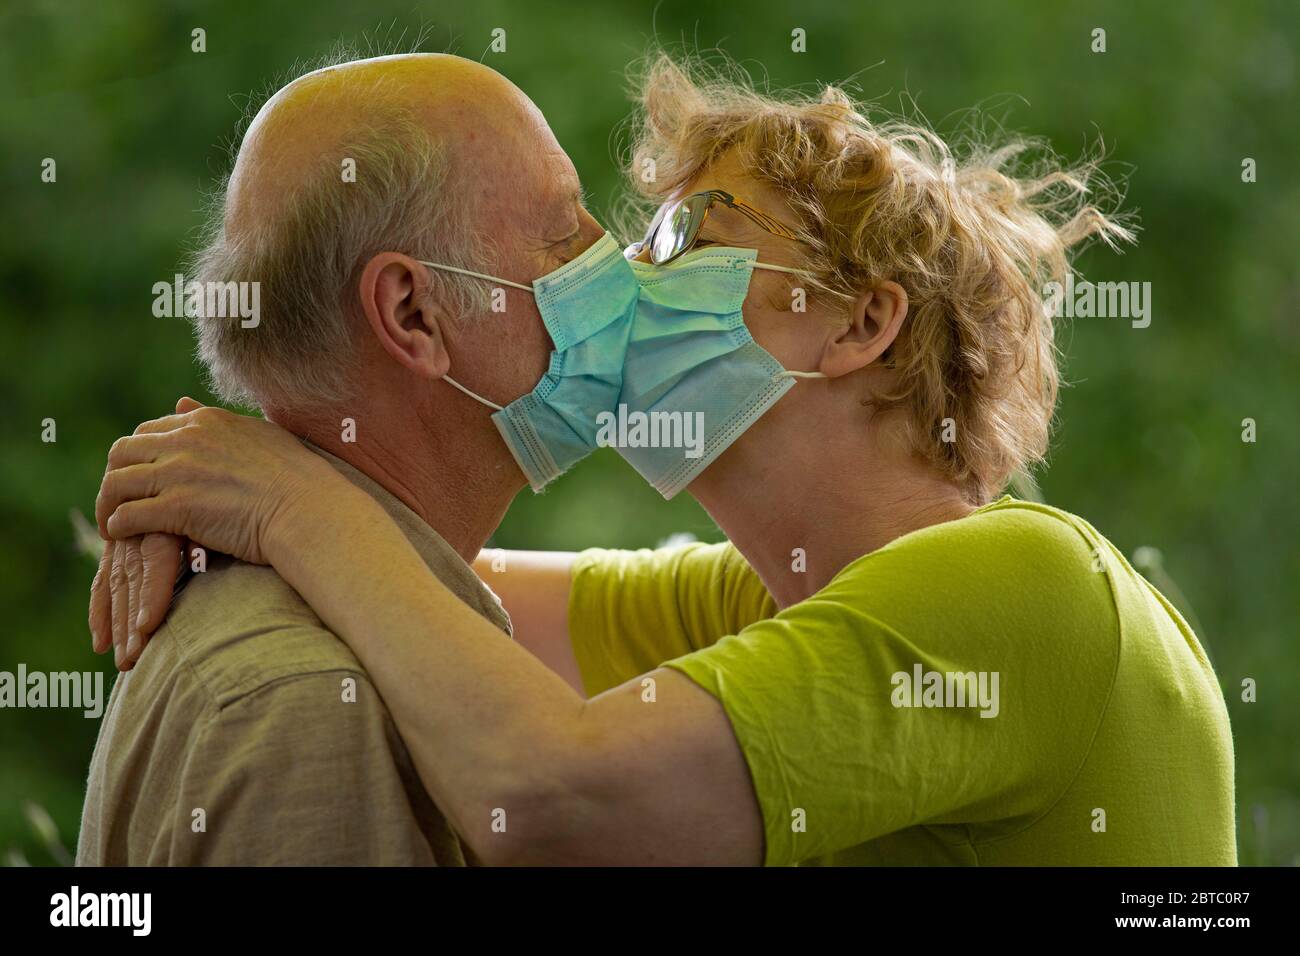 kissing in times of Corona, Germany Stock Photo